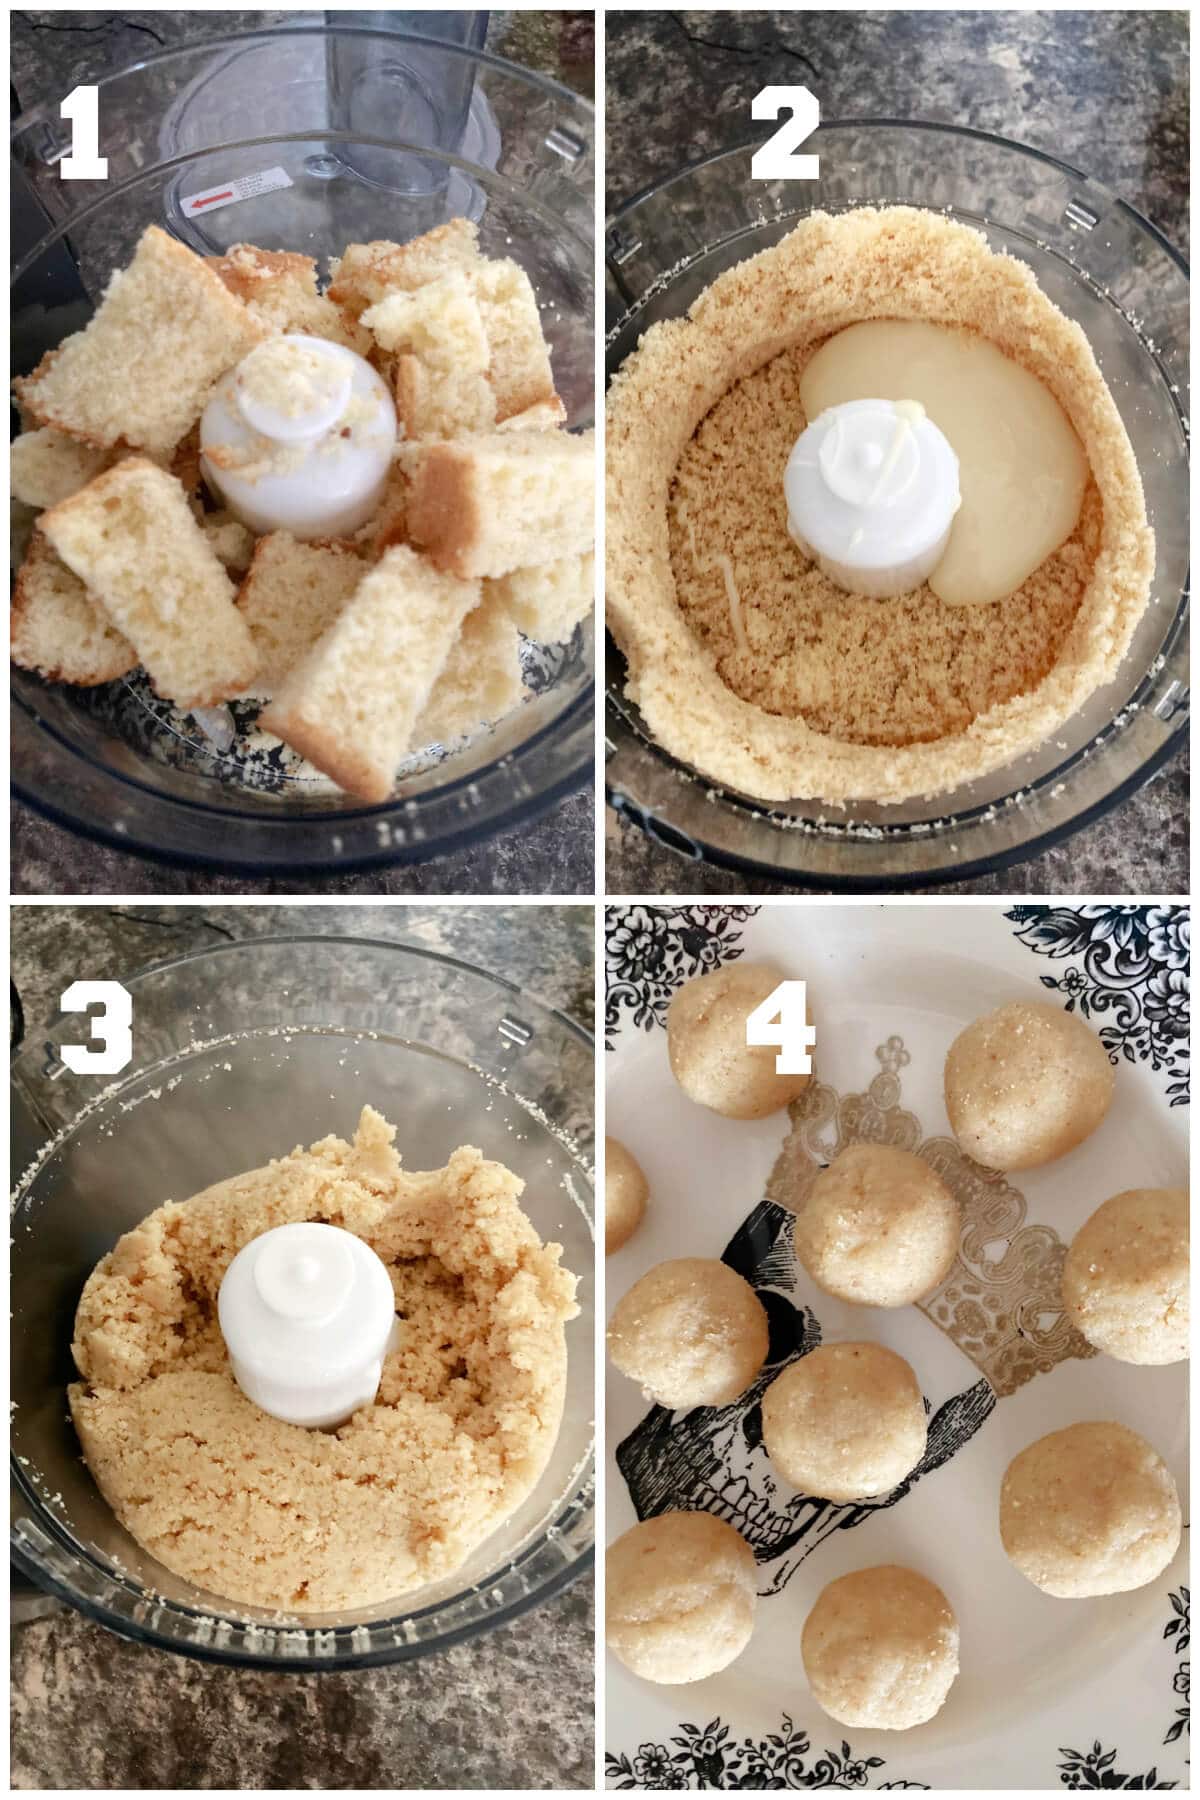 Collage of 4 photos to show how to make cake pops.